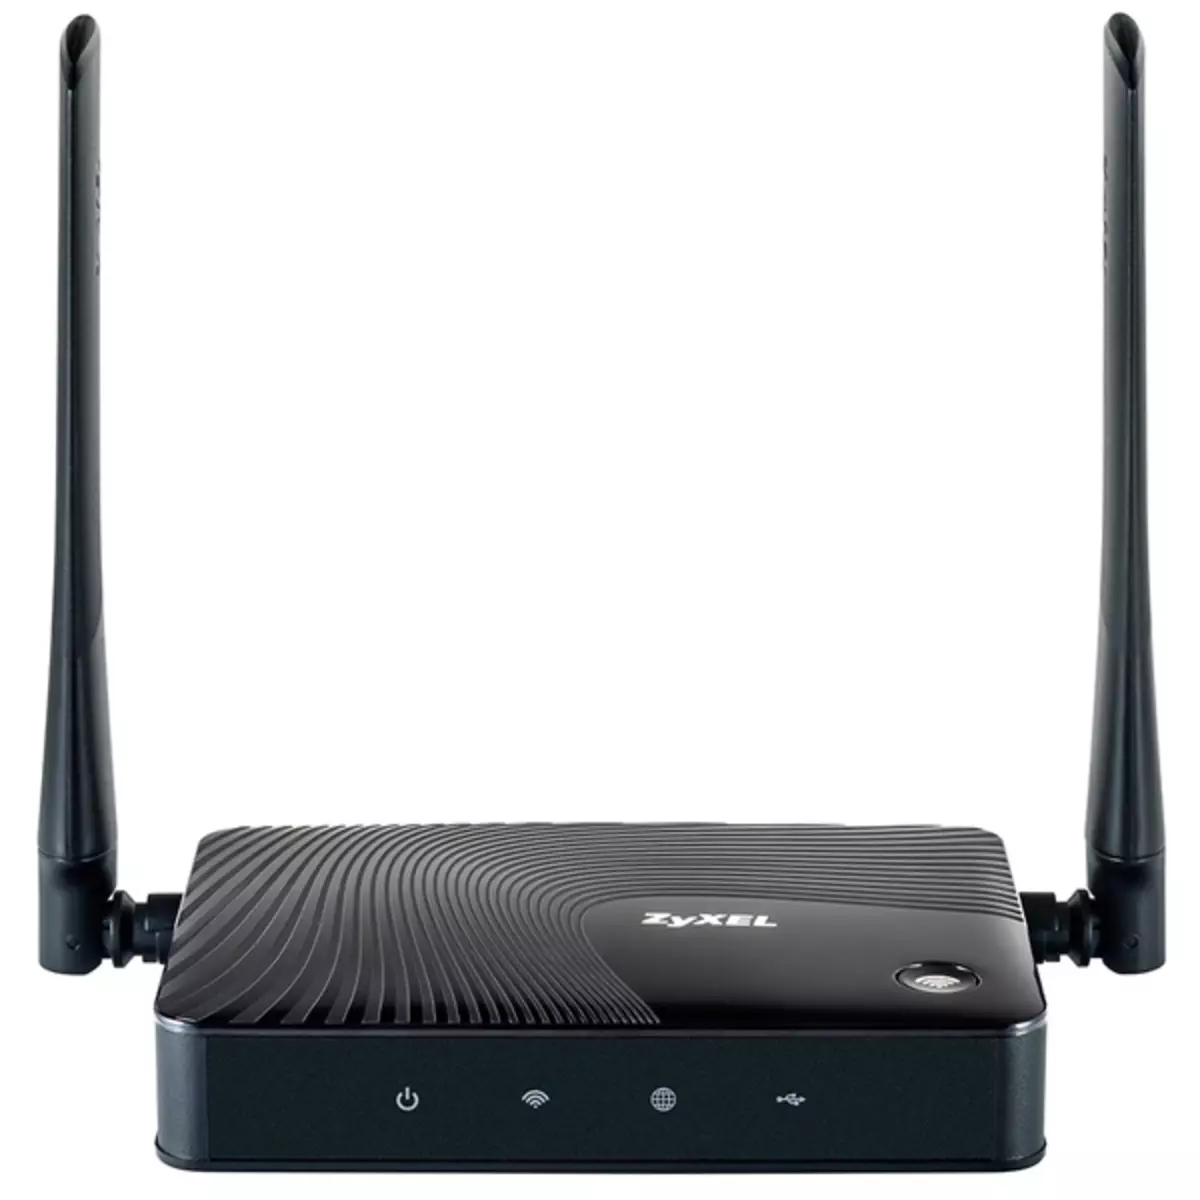 Configure The Zyxel Keenentic 4g Router